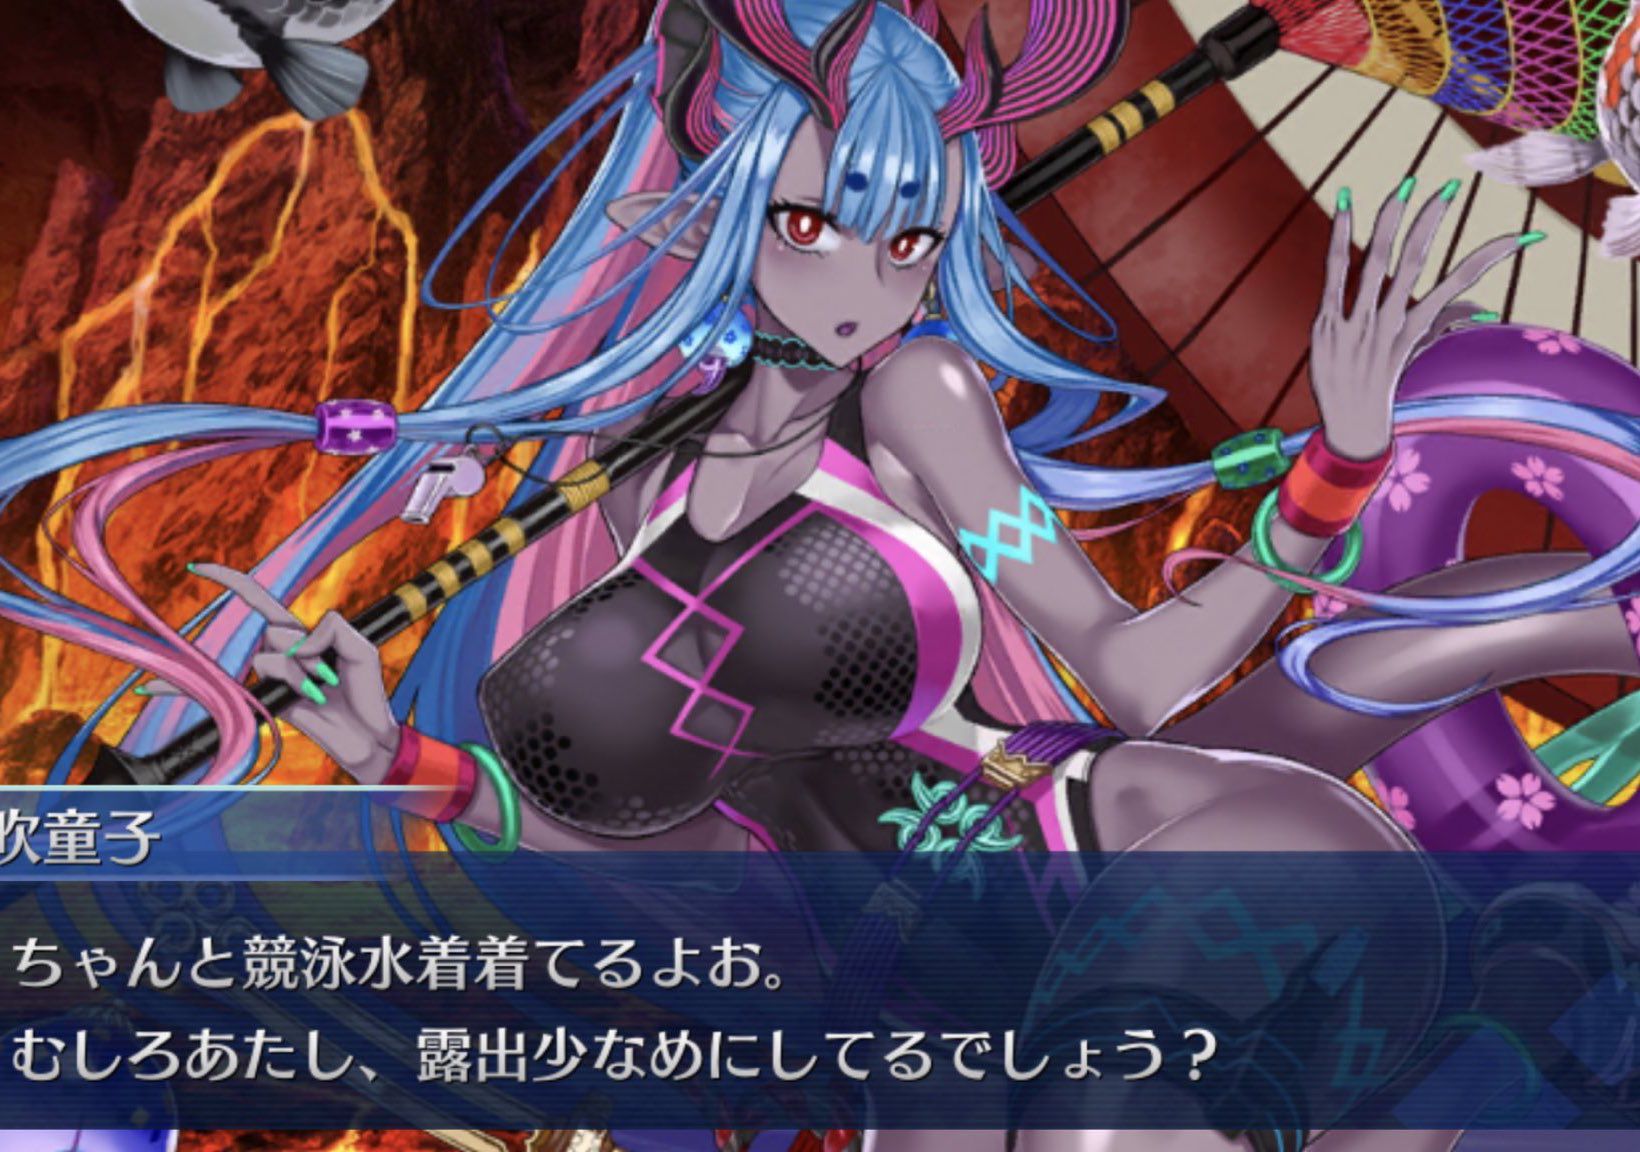 【Sad News】 FGO, the character of the swimsuit event is too sexual, and without age limit is slapped as abnormal 4